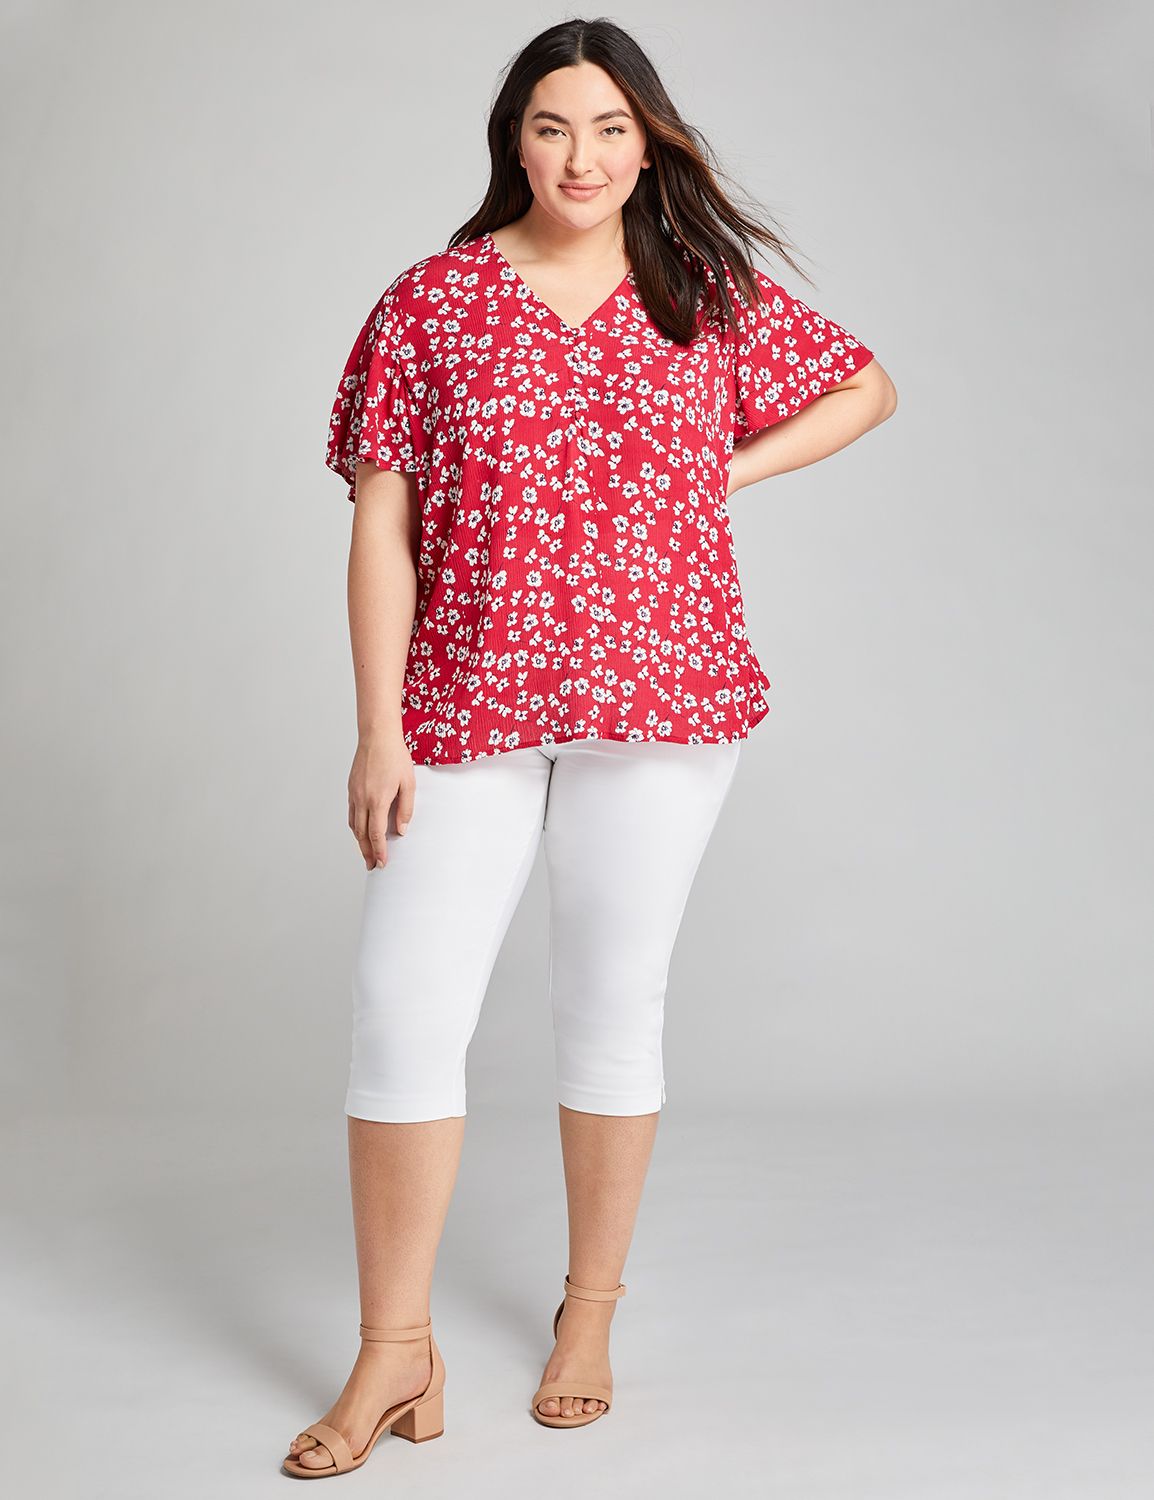 Clearance Plus Size Clothing - On Sale 